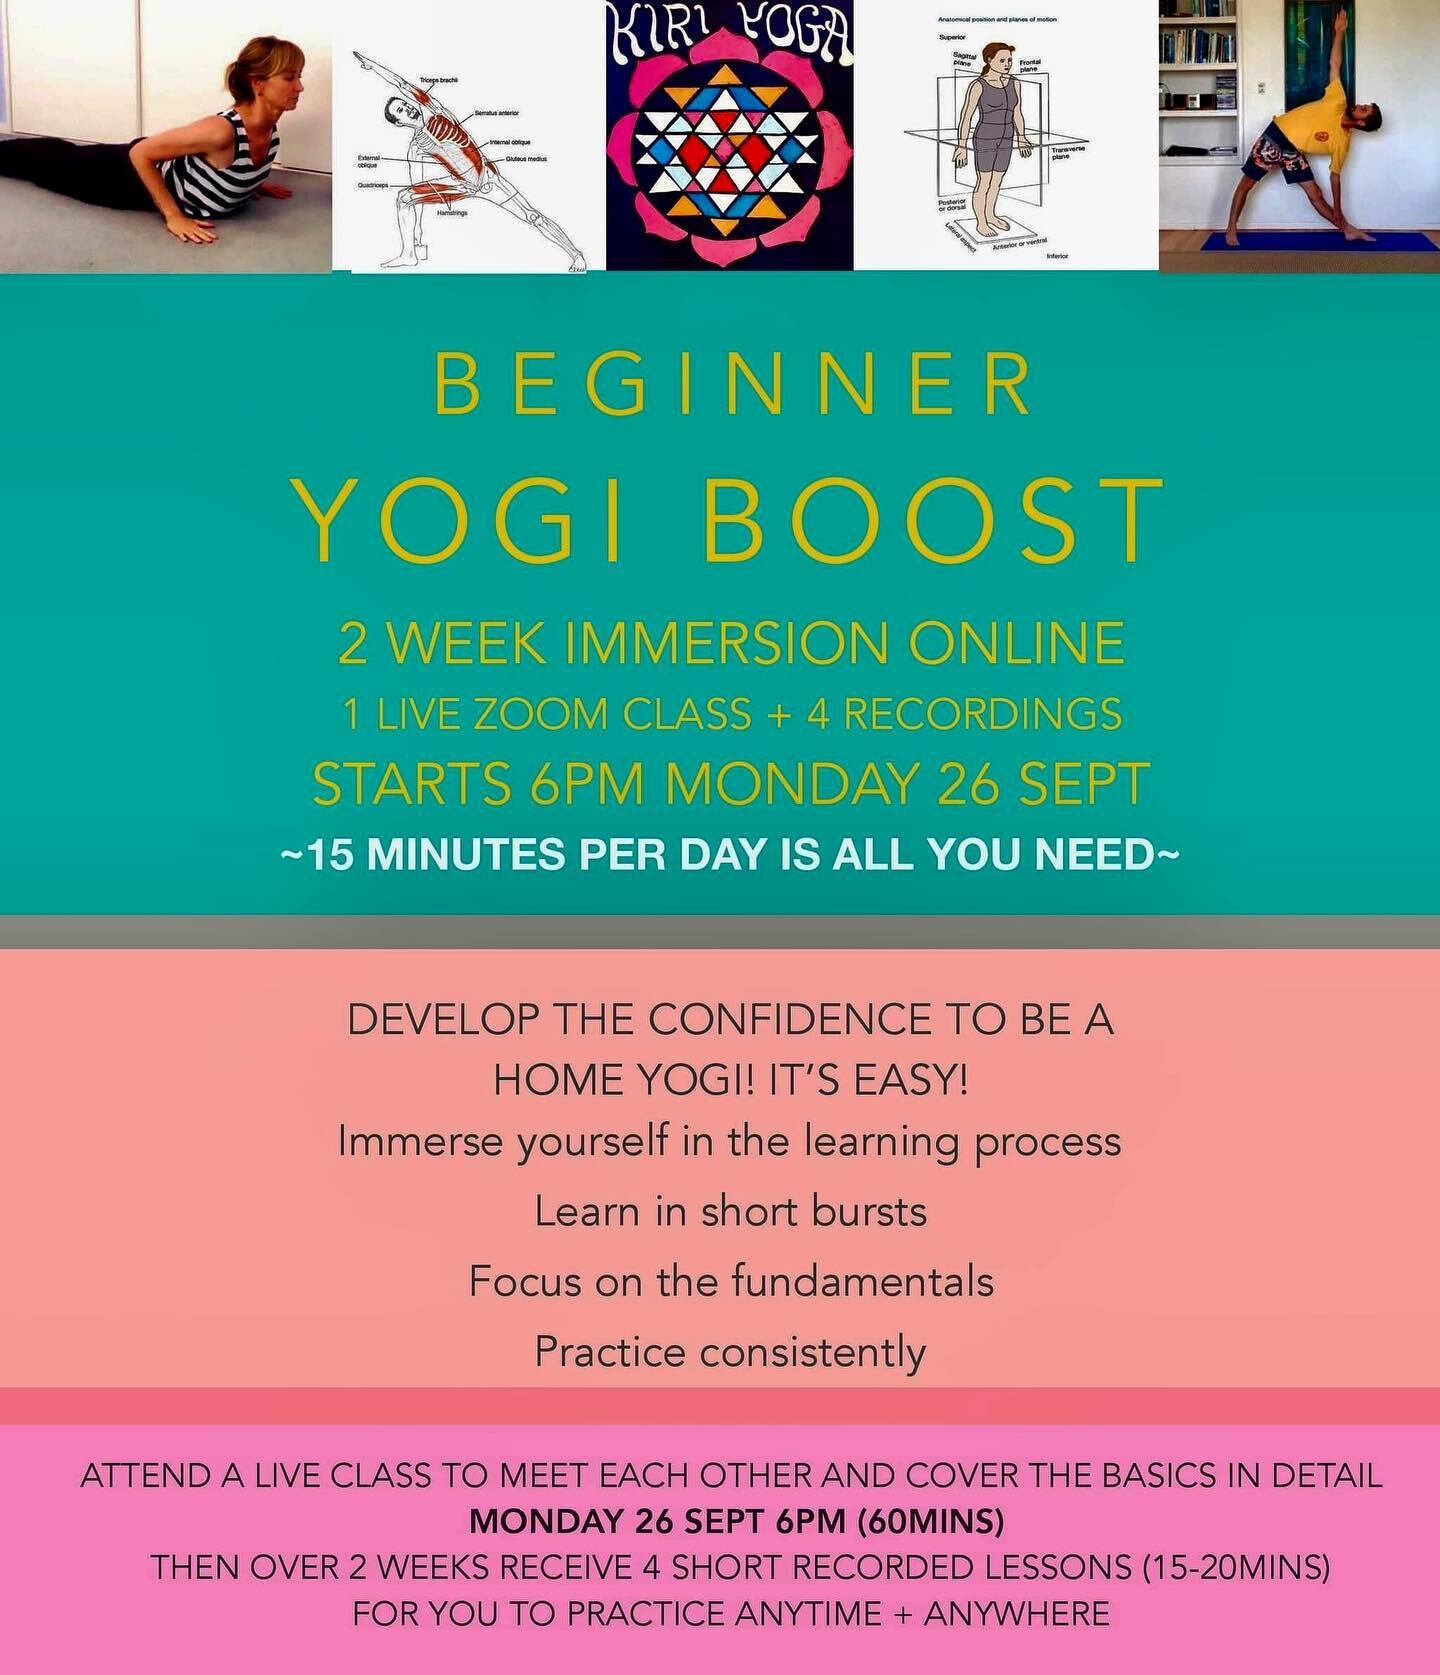 Online course with 1x live via Zoom and 4x recorded videos for the novice home yogi.

This mini immersion is designed to boost your confidence to do yoga on your own at home! No yoga experience is required.

In this beginner yogi boost you will learn